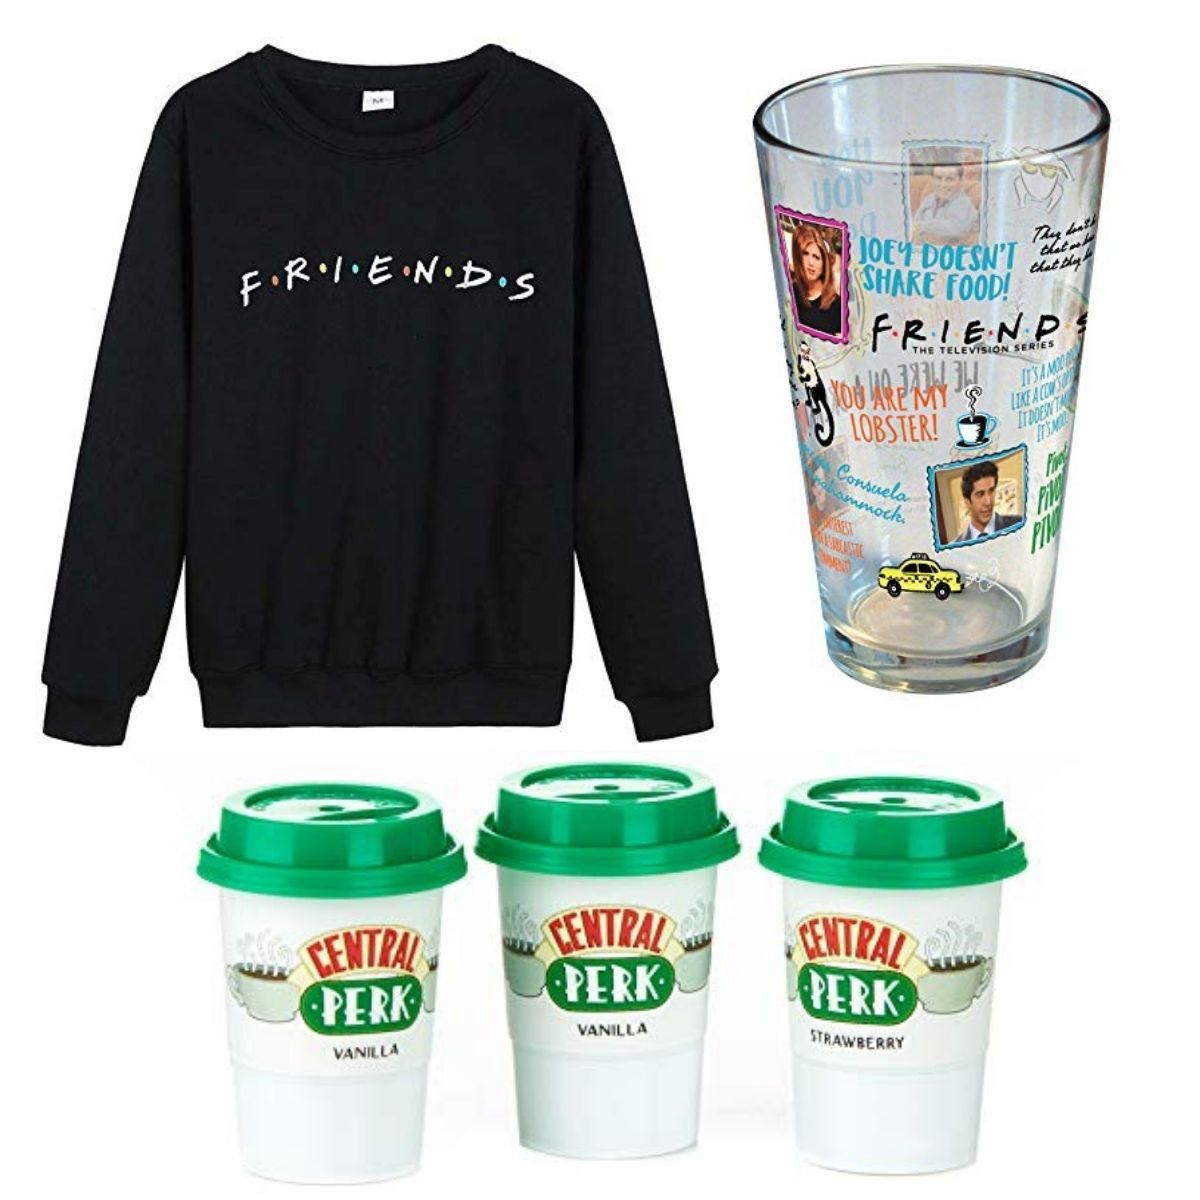 Bring On The 90's Nostalgia With All these Great Gifts For 'Friends' Fans